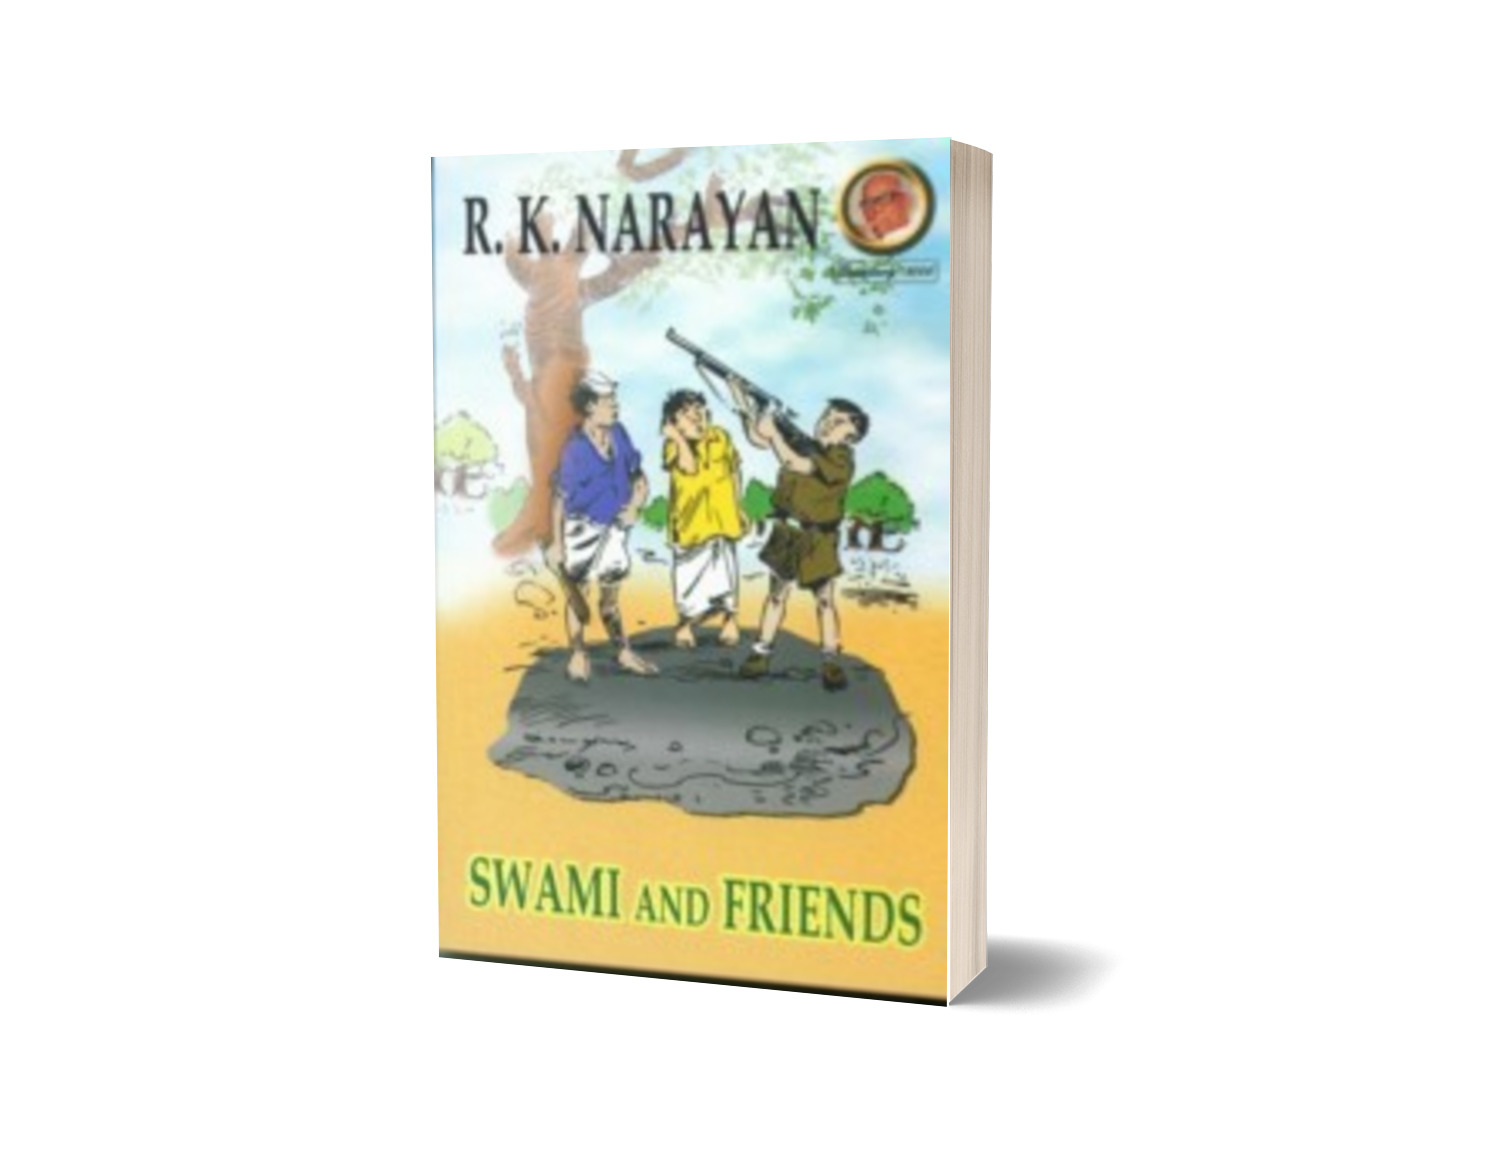 book review on swami and friends